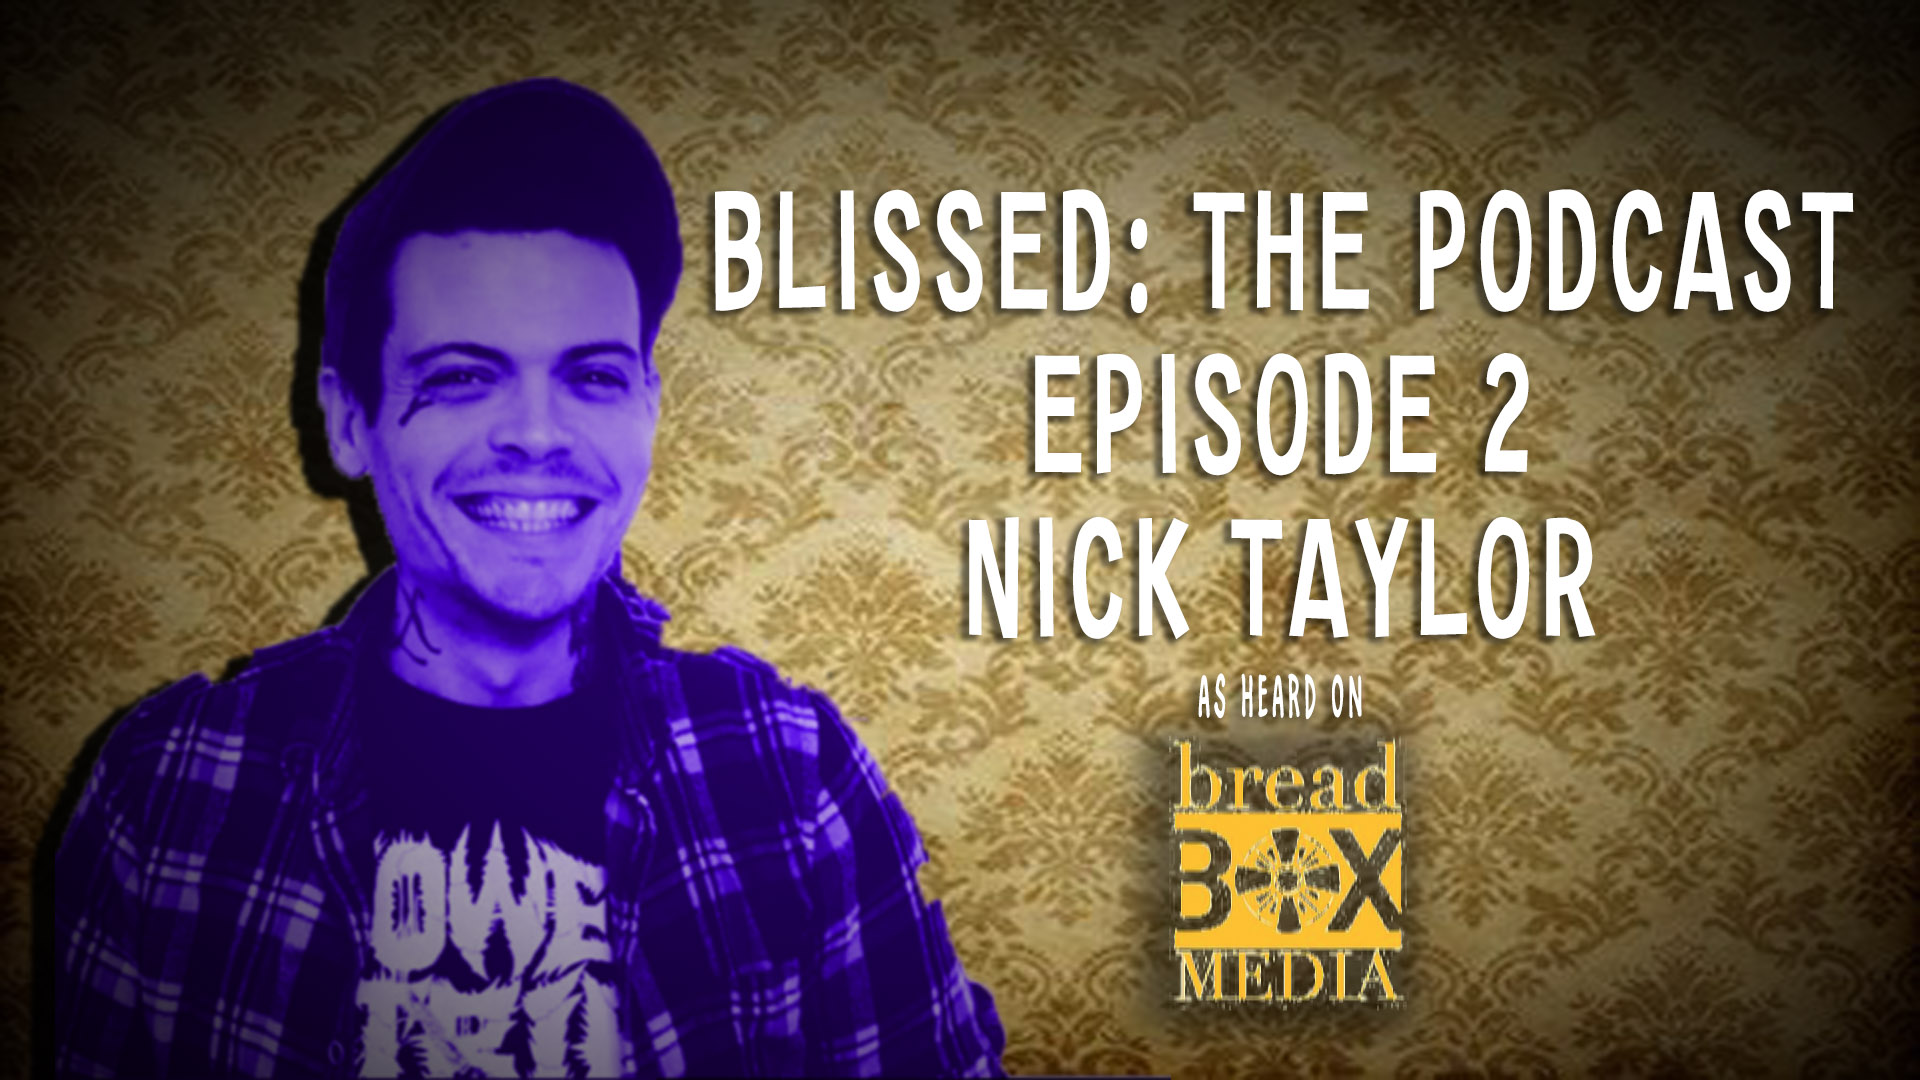 Blissed: The Podcast - Episode 2 with Nick Taylor - How To Find Your Bliss 